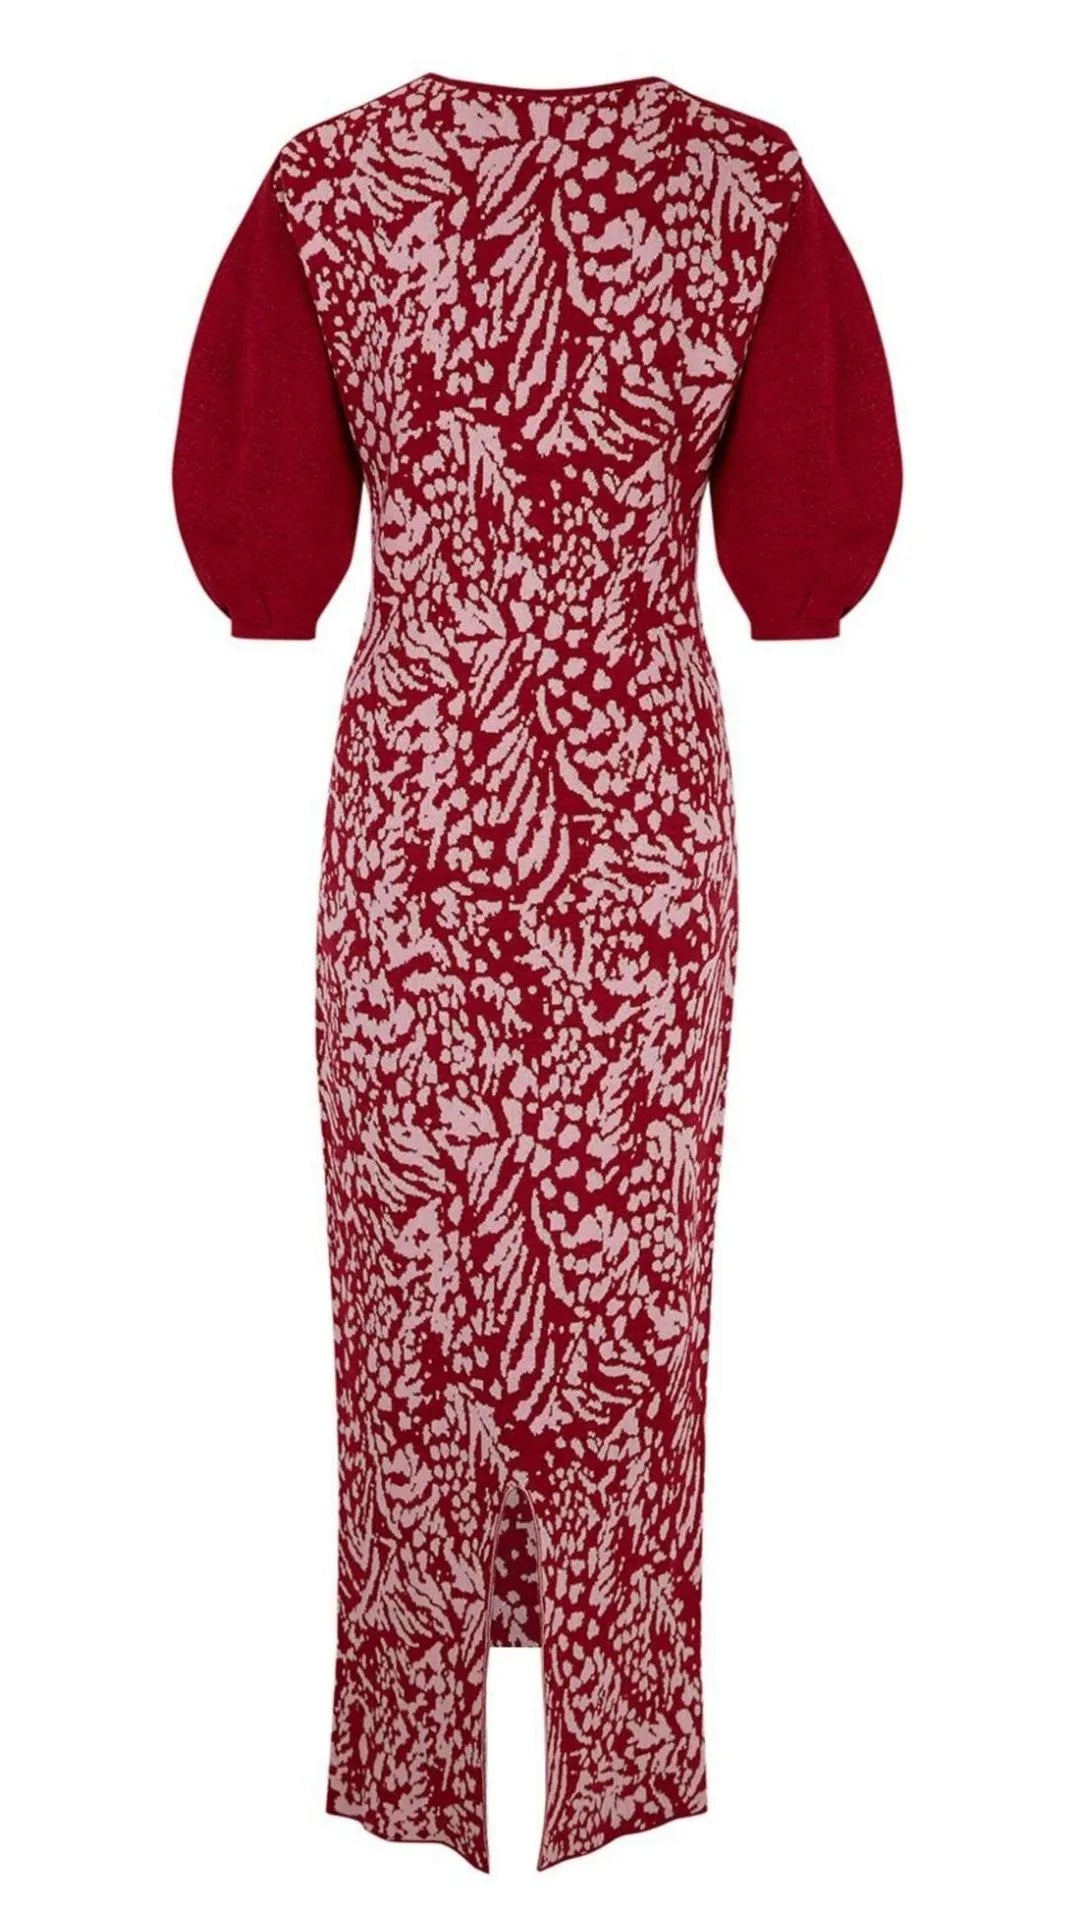 Clea Stuart Carmesi Feathers Dress. Luxury knitwear dress in burgundy and pink. The dress features mid length balloon sleeves and is midi length. There is a subtle weave of metallic threading, giving the dress an elegant look. Product photo shown from the back view.